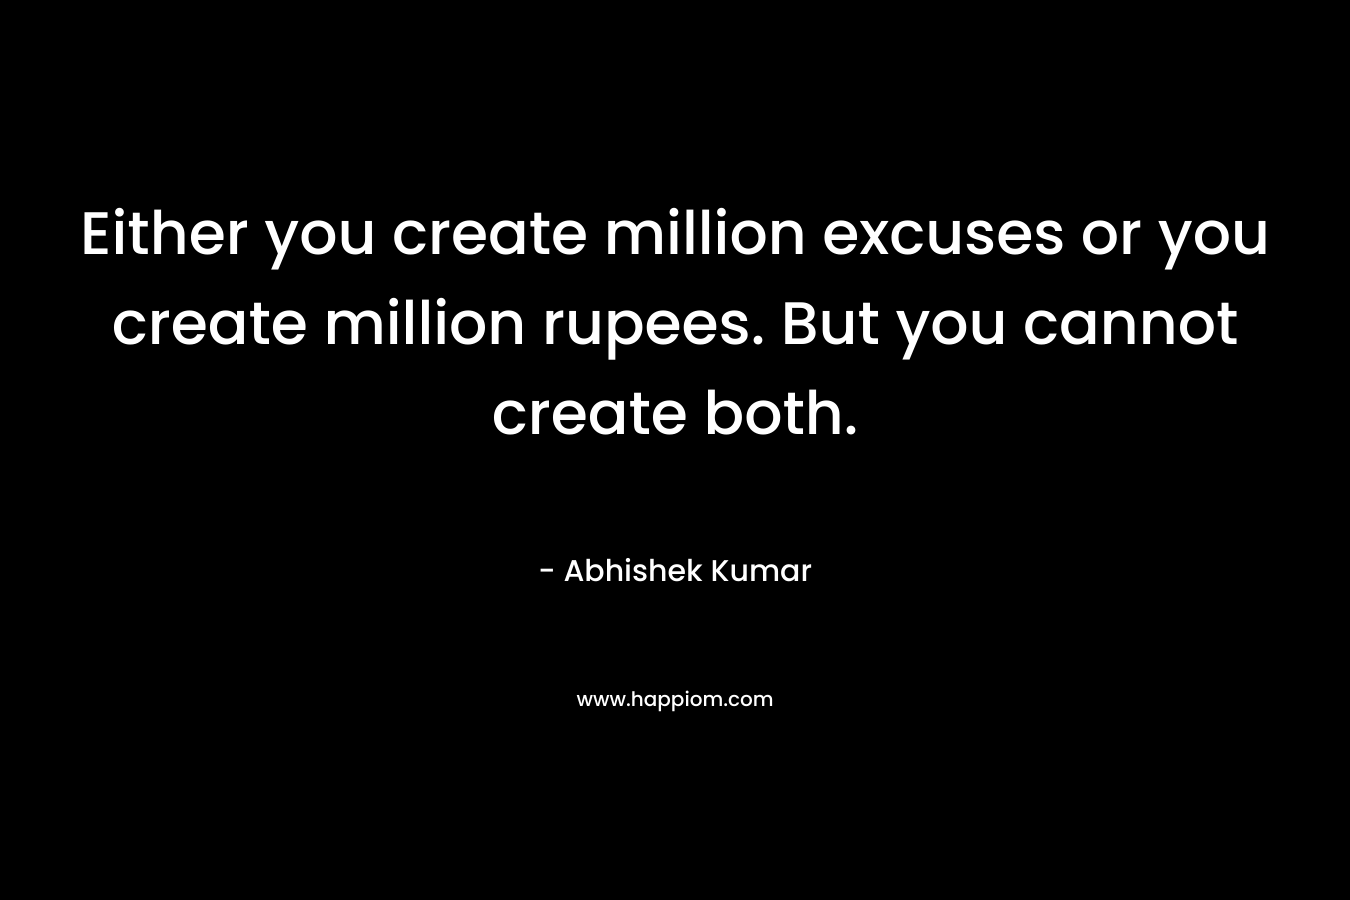 Either you create million excuses or you create million rupees. But you cannot create both.